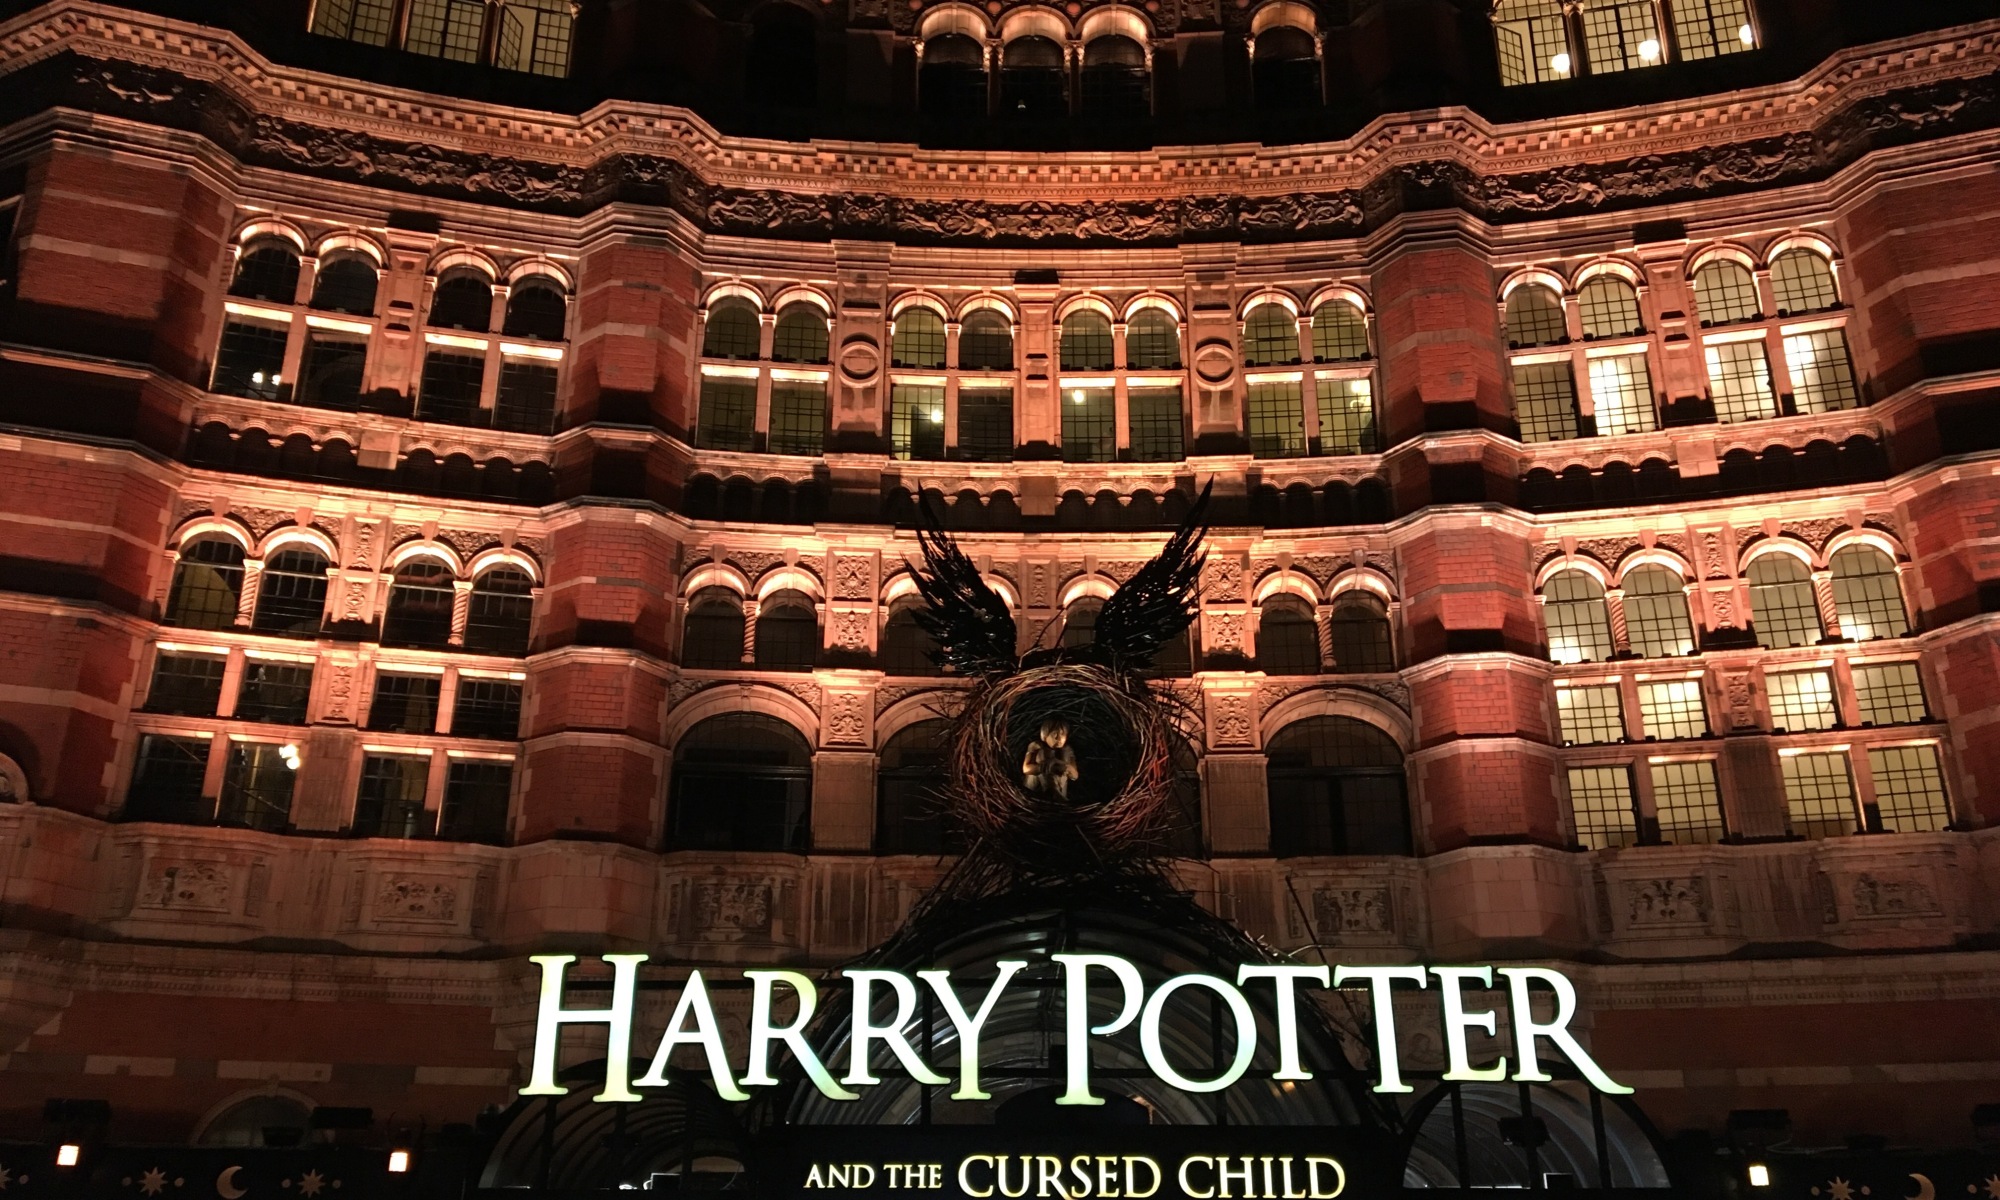 Signage for Harry Potter and the Cursed Child outside Palace Theatre, London.